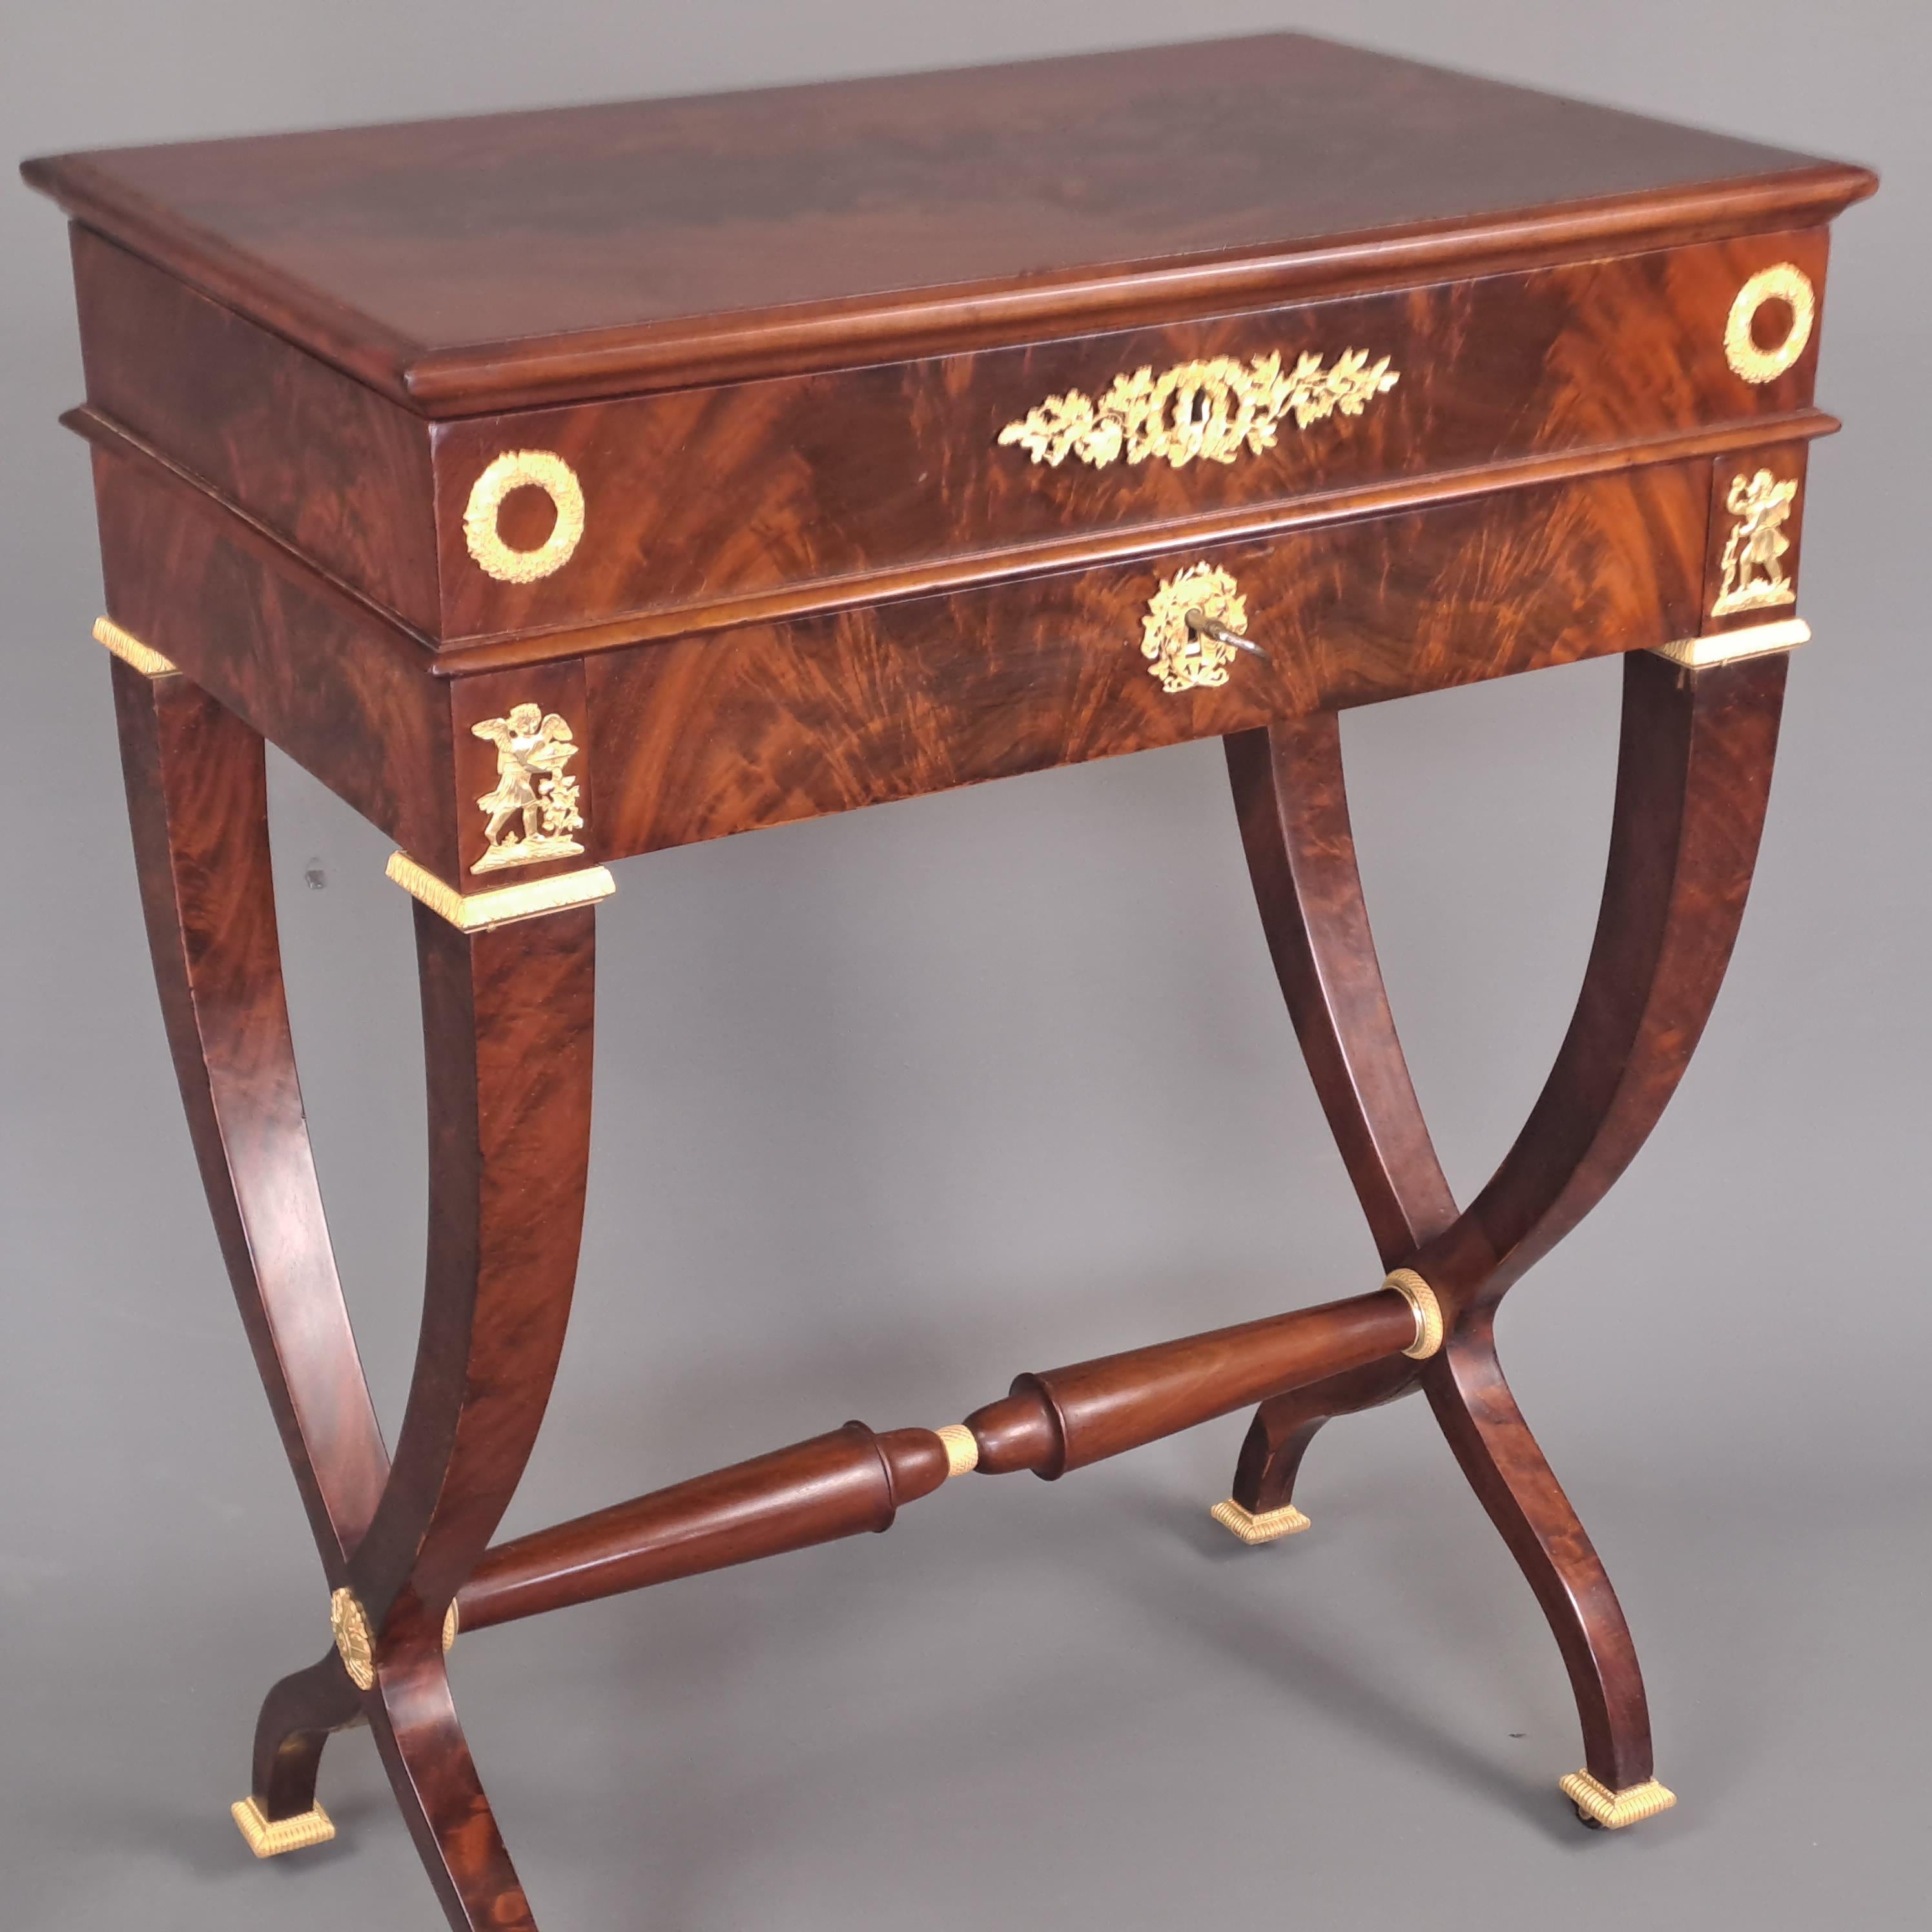 18th Century Gilt Bronze Mounted Empire Work Table in Mahogany